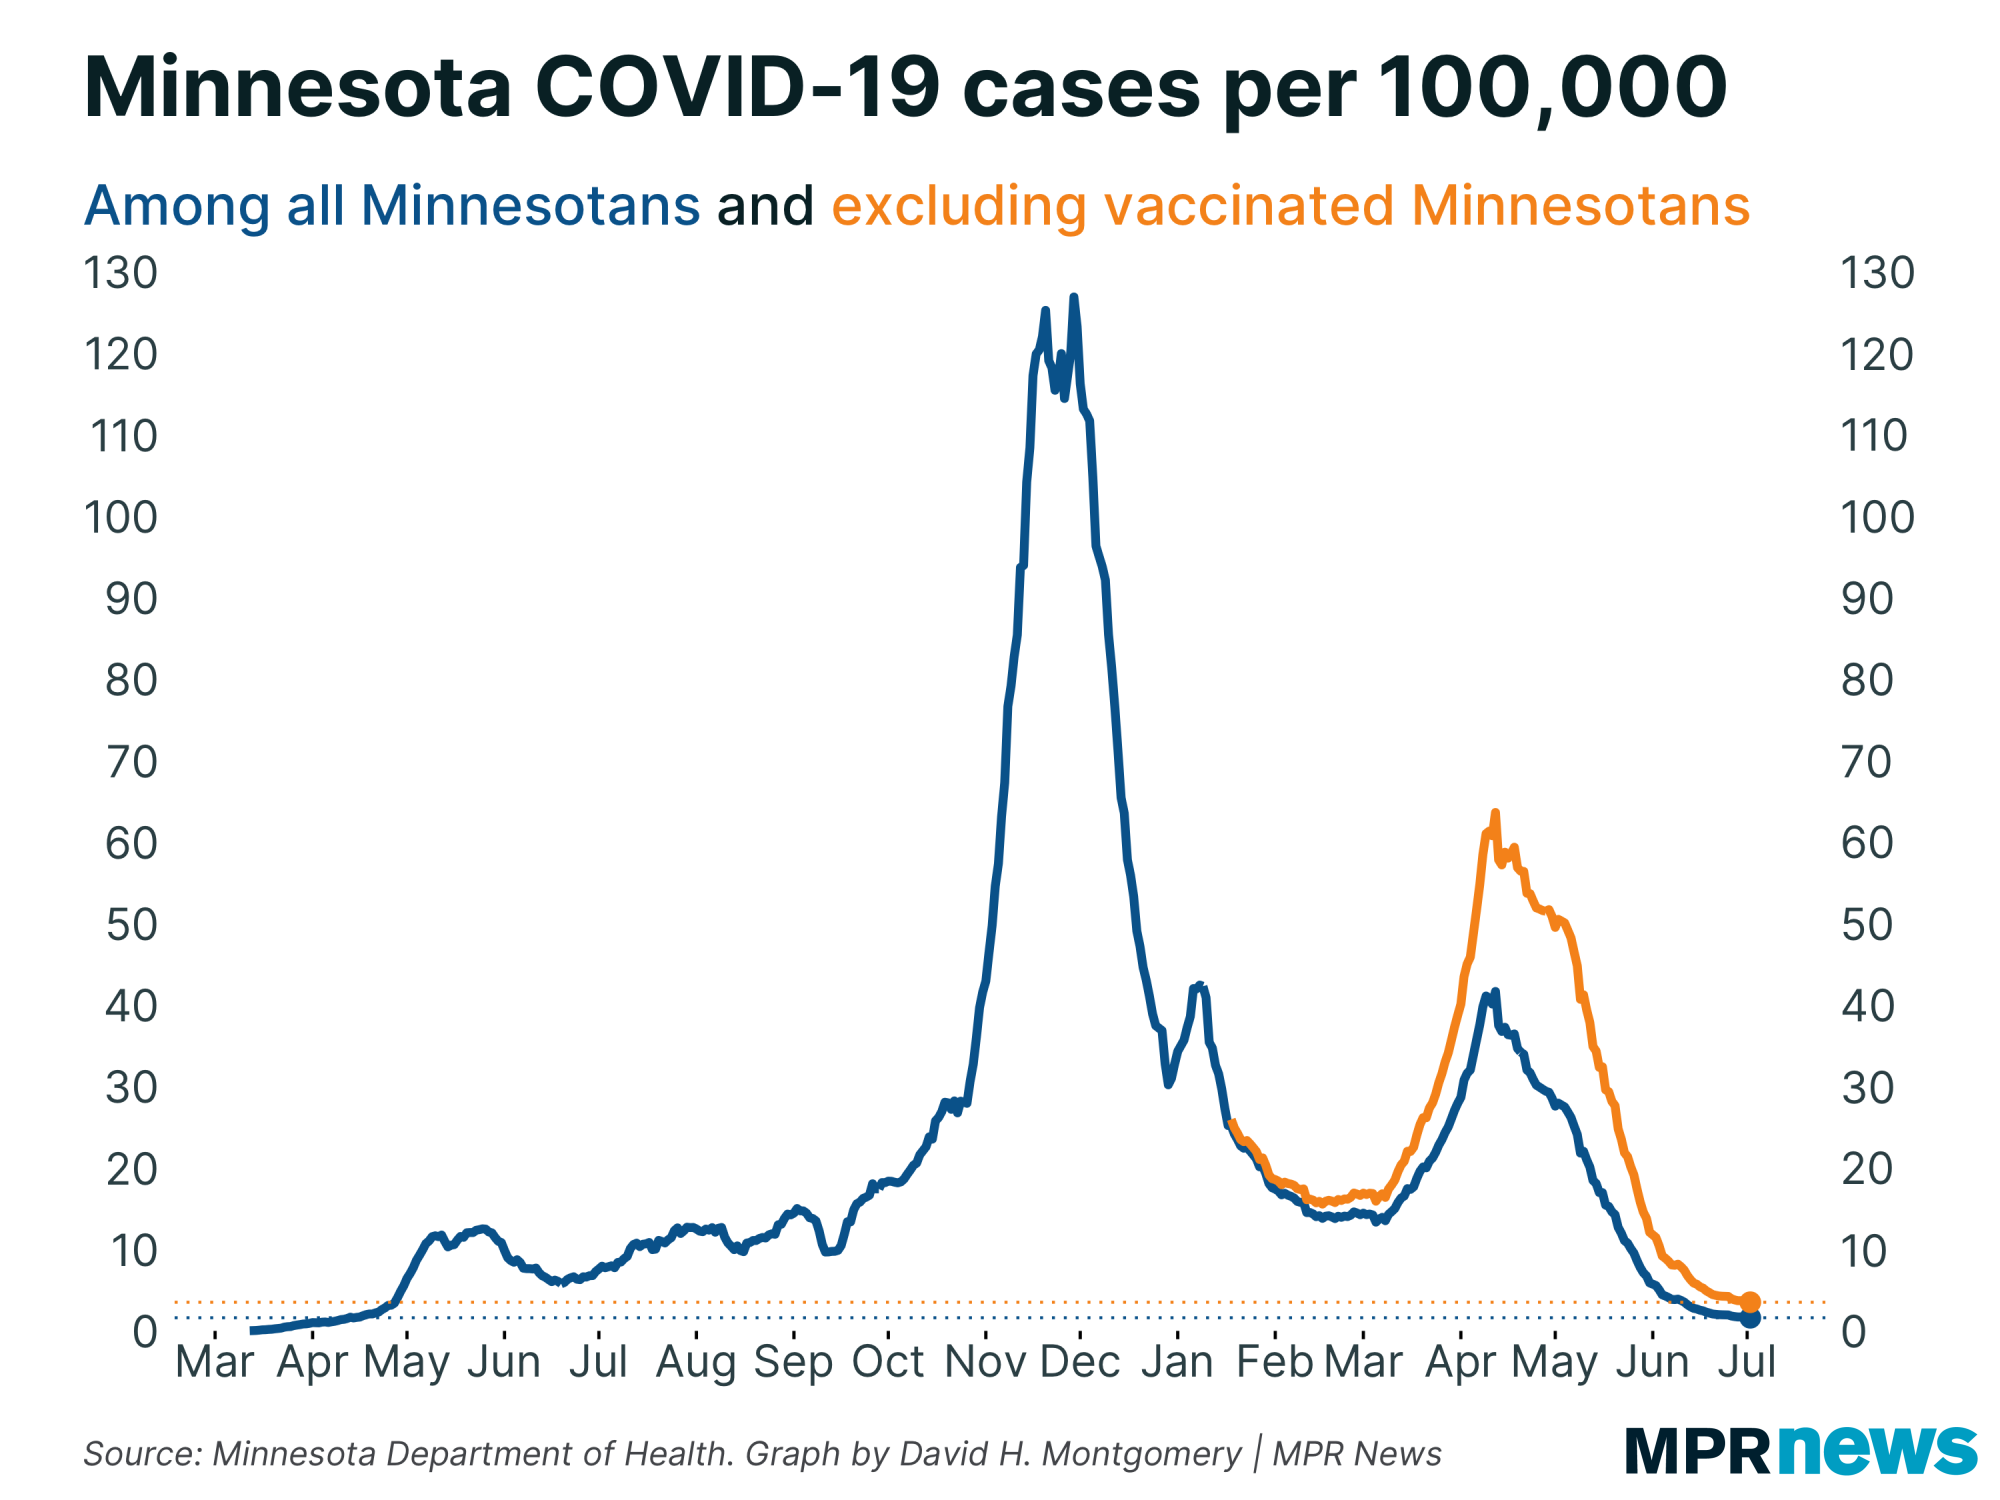 Graph of Minnesota COVID-19 cases per 100,000, adjusted for the unvaccinated population